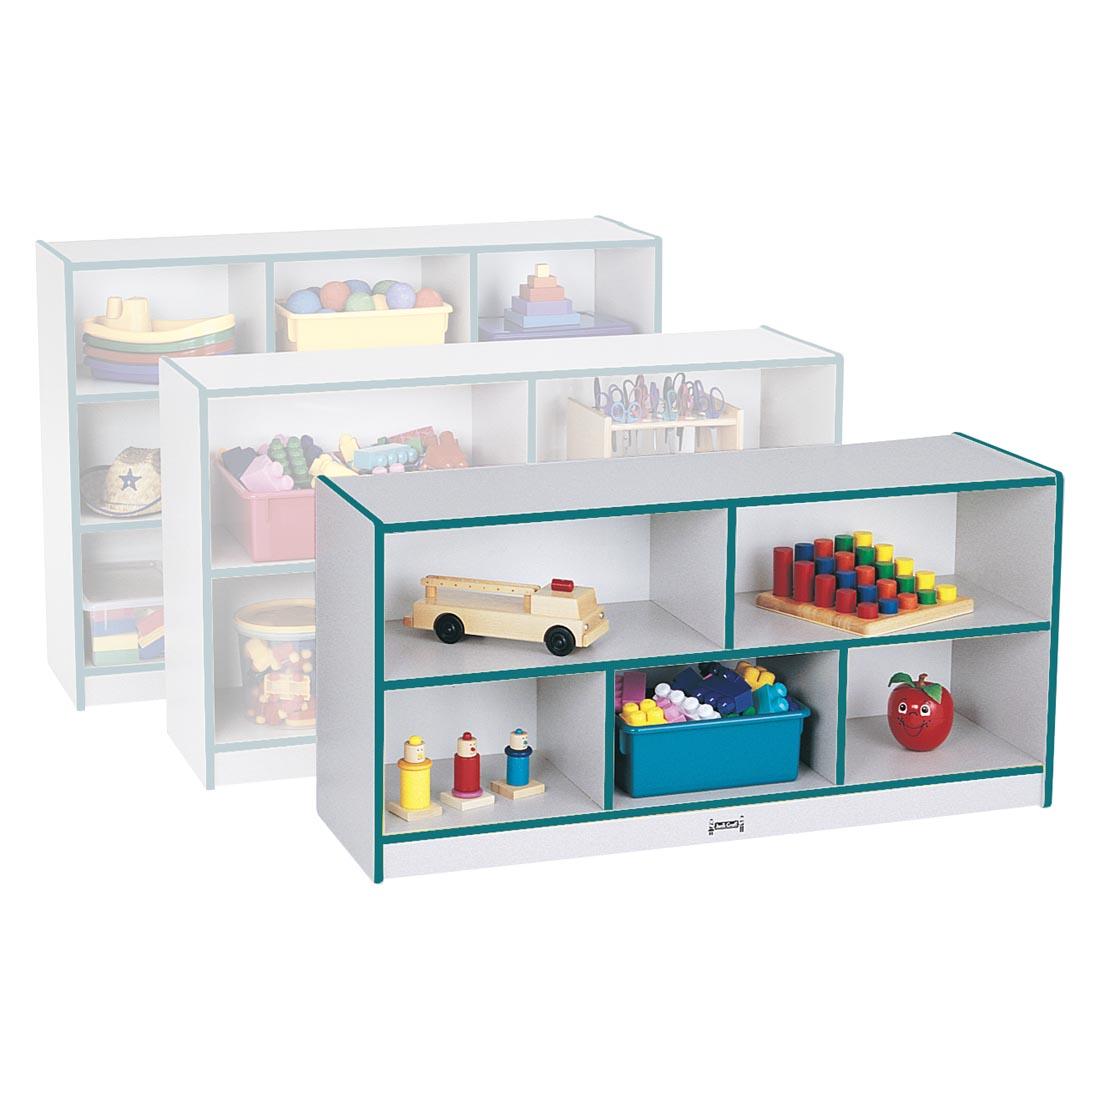 Teal Edge Rainbow Accents Single Mobile Storage Unit Toddler Height with two other shelves shown behind for scale; suggested storage contents also shown